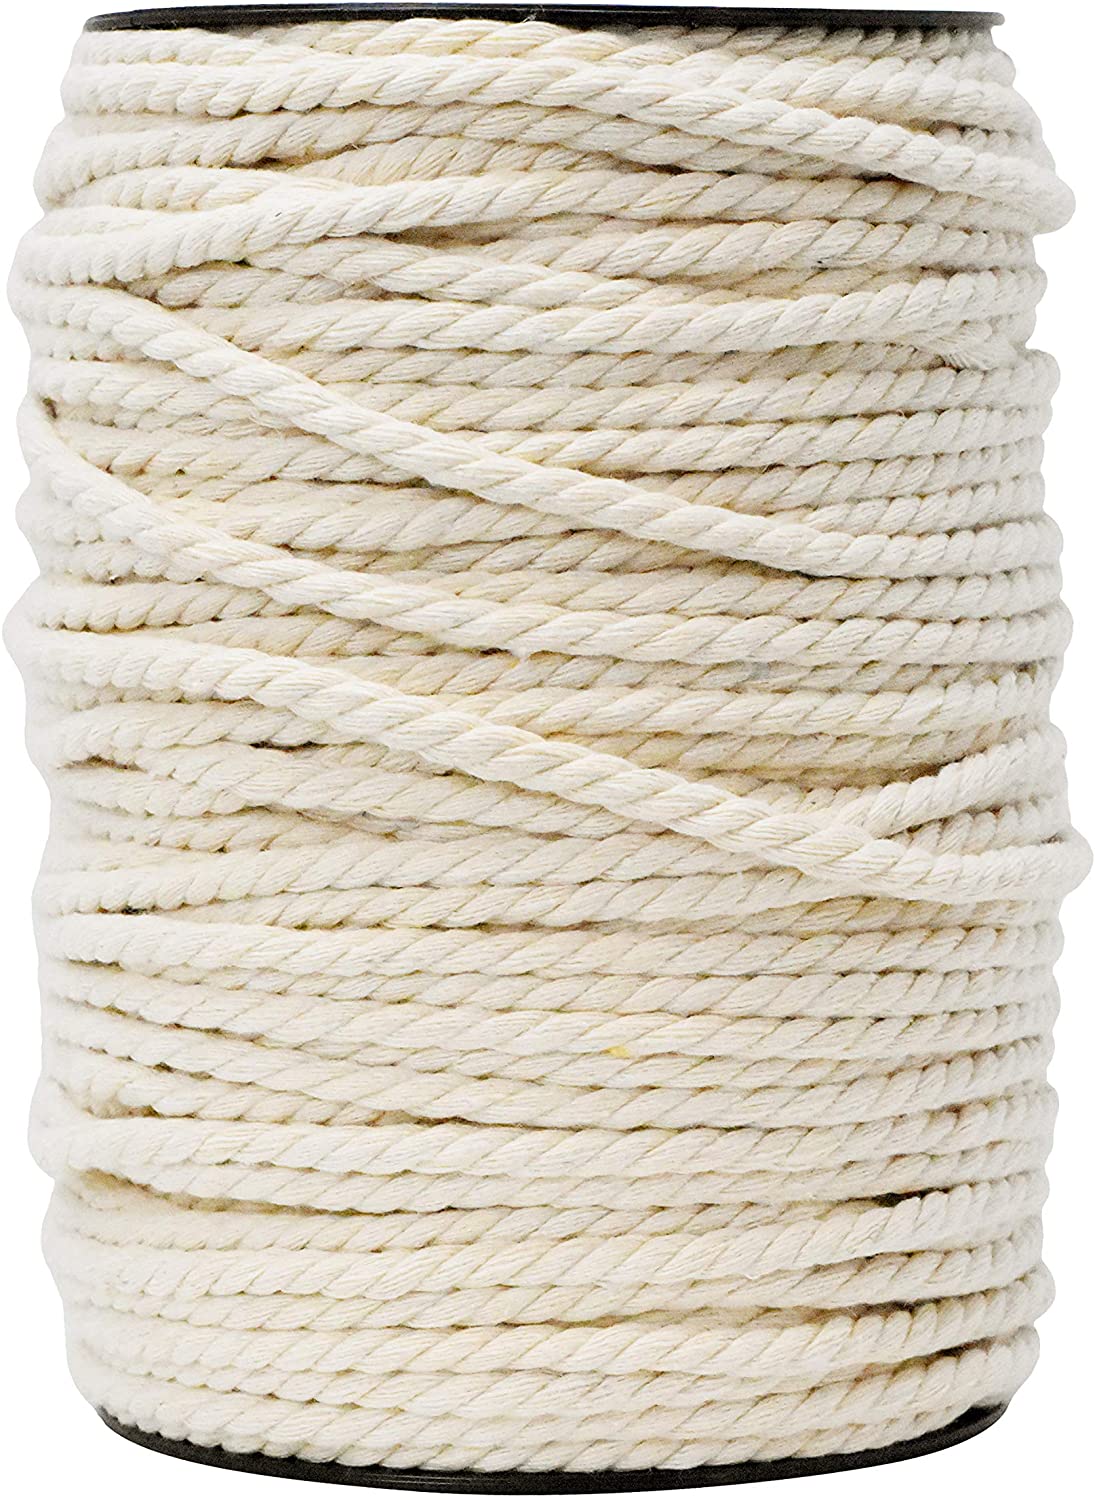 Wholesale Wholesale Colorful Wall decorative DIY Handmade 2mm Braided rope  cotton macrame cord twisted cord 100yards/roll From m.